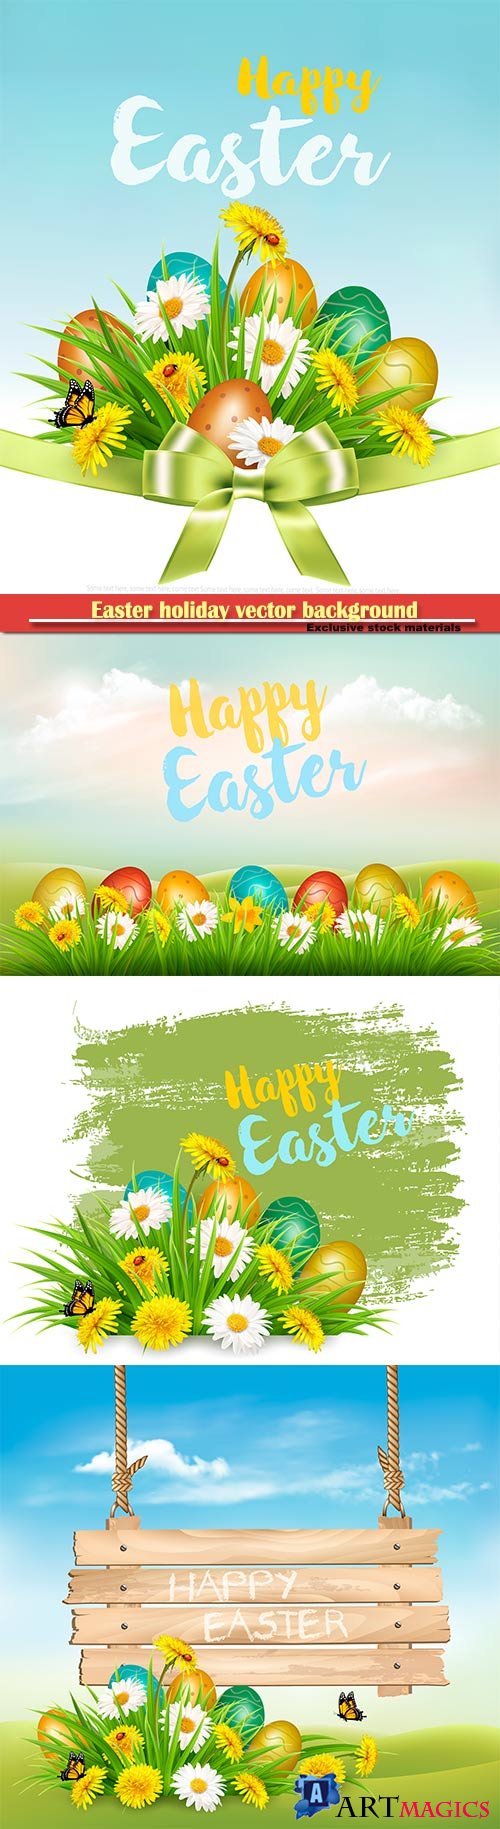 Easter holiday vector background with colofrul eggs in green grass